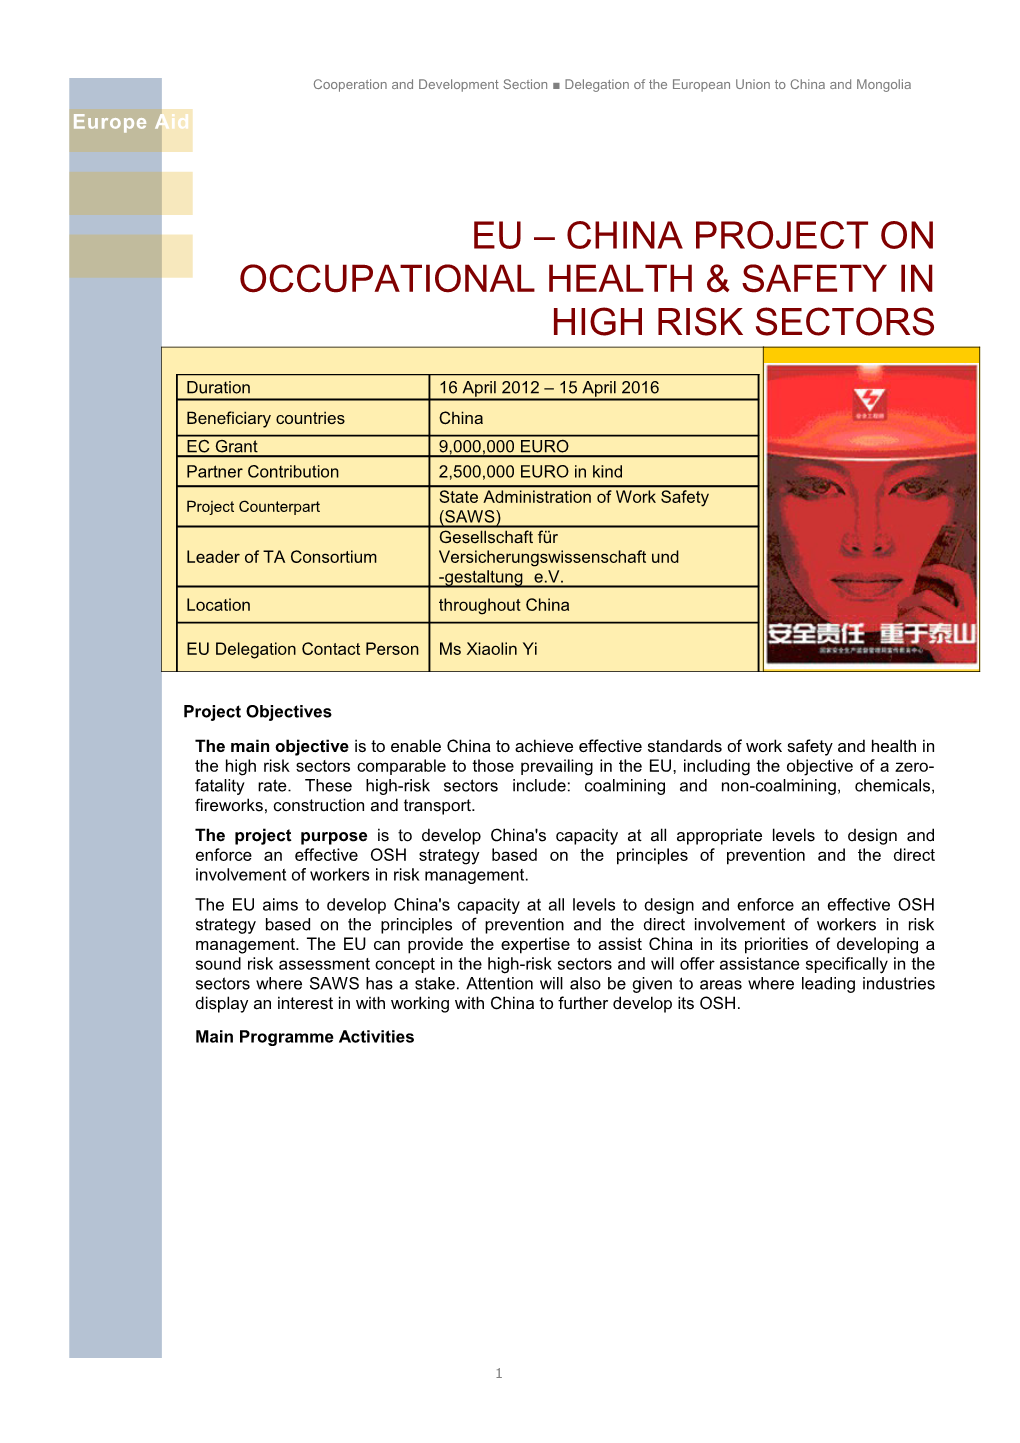 Eu Chinaproject on Occupational Health & Safety in High Risk Sectors